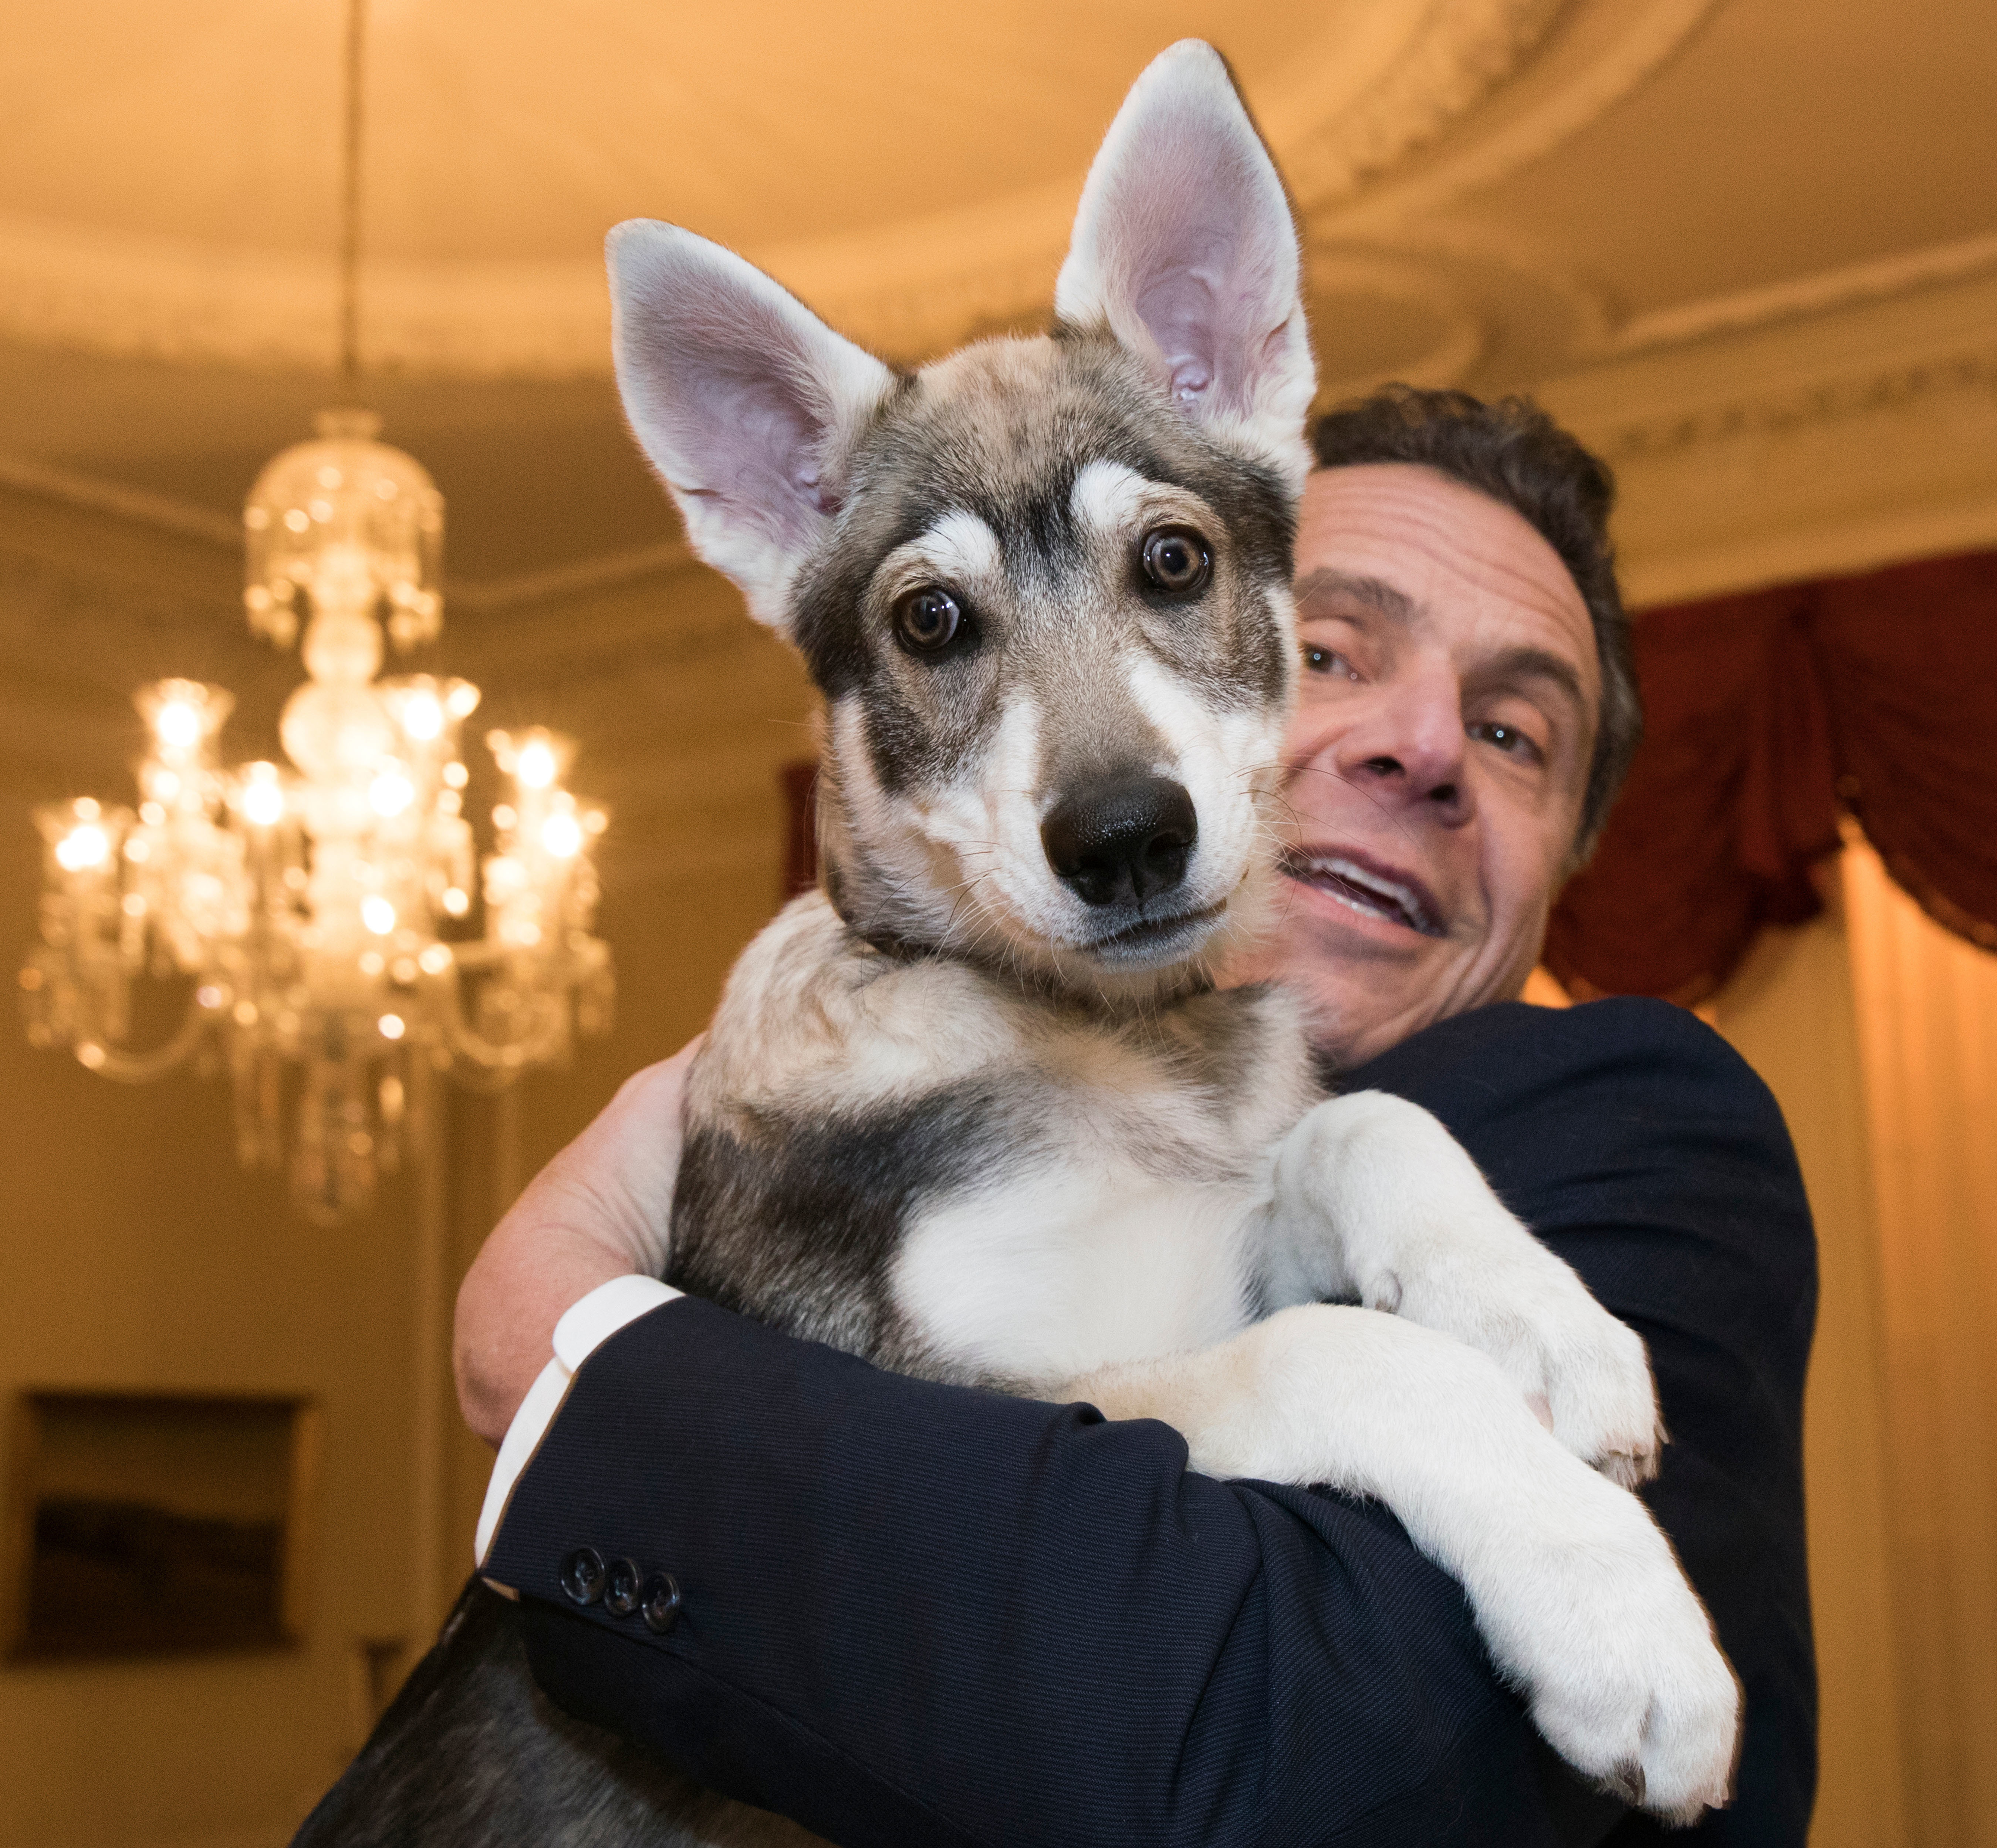 Governor Andrew Cuomo holds his new dog Captain, a Siberian Shepherd mix, during a mayoral conference in Albany, New York, on February 12, 2018.